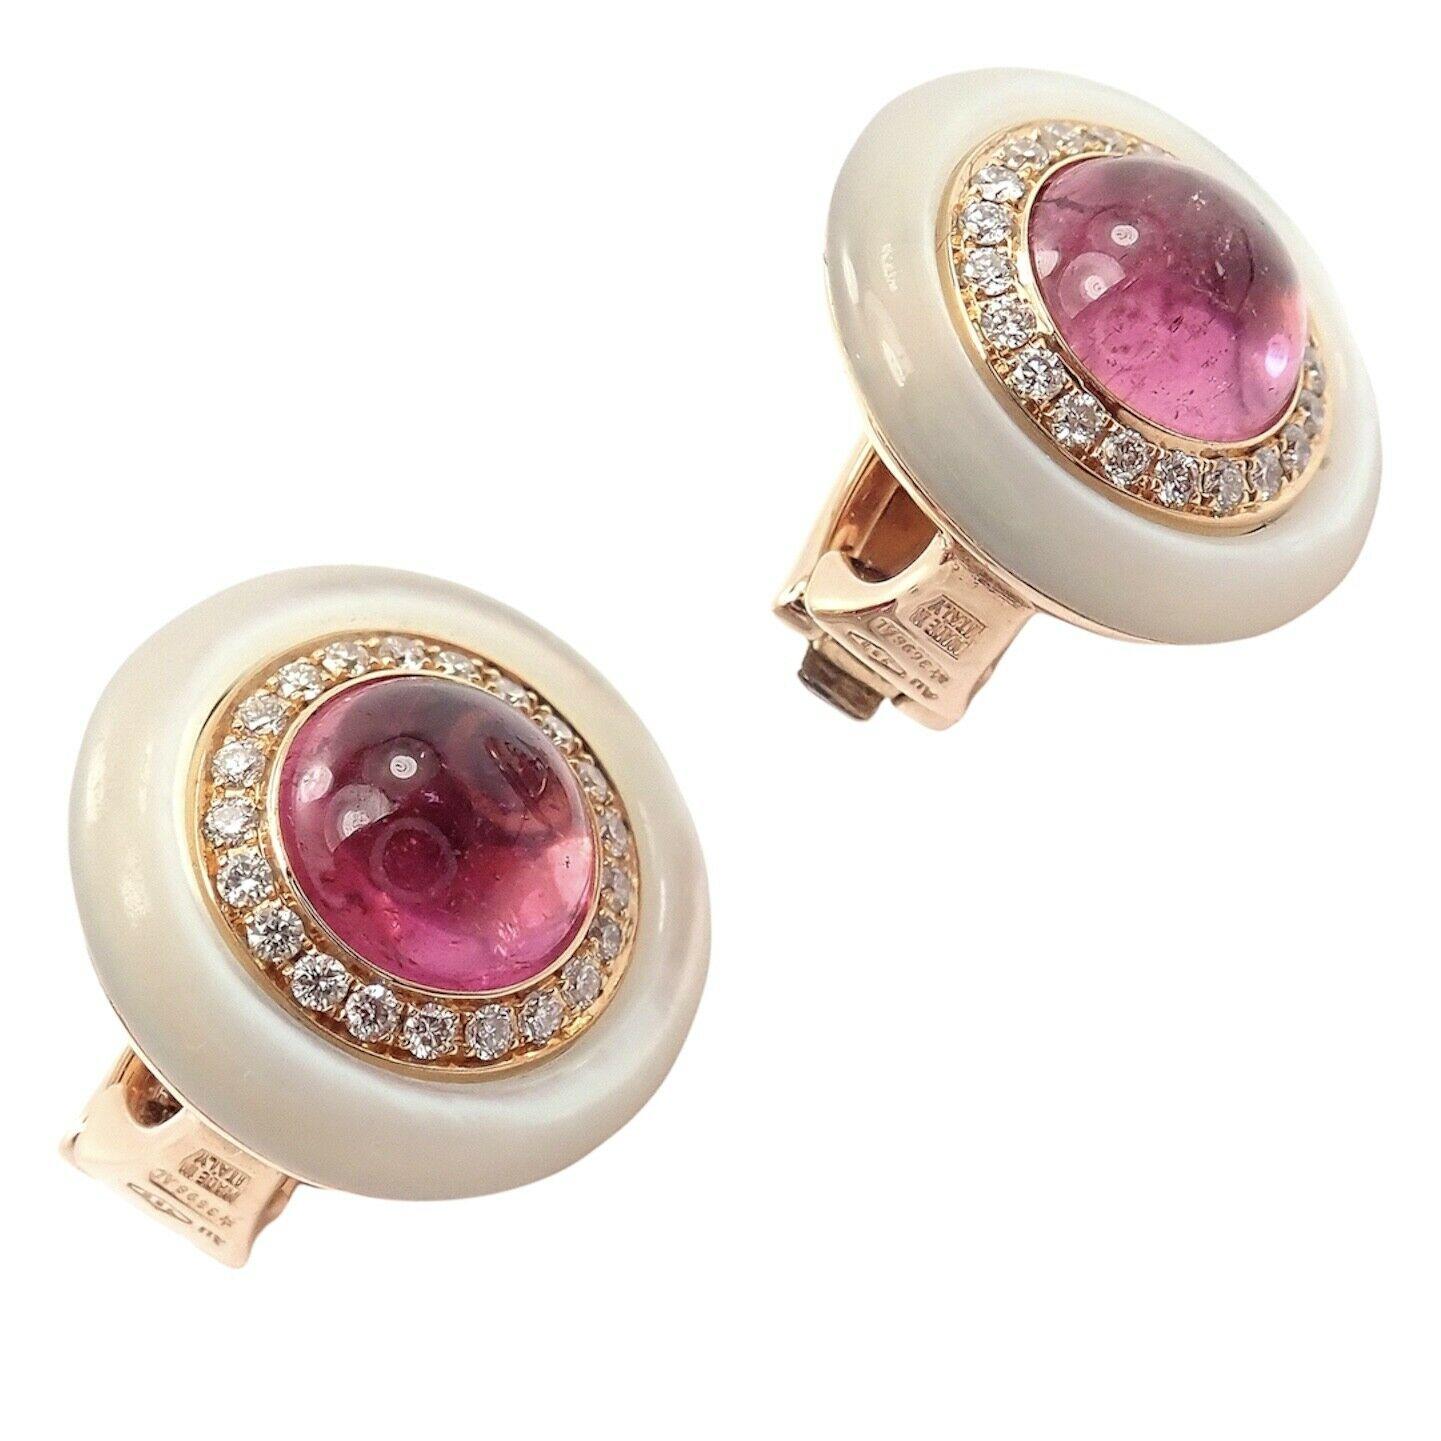 18k Yellow Gold Vintage Pink Tourmaline Diamond Mother Of Pearl Earrings by Bulgari. 
With 2x cabochon cut intense pink tourmalines - Each 7mm in size
2x circle cut mother of pearls - Each 15mm in size
40x round brilliant cut diamonds, VVS2